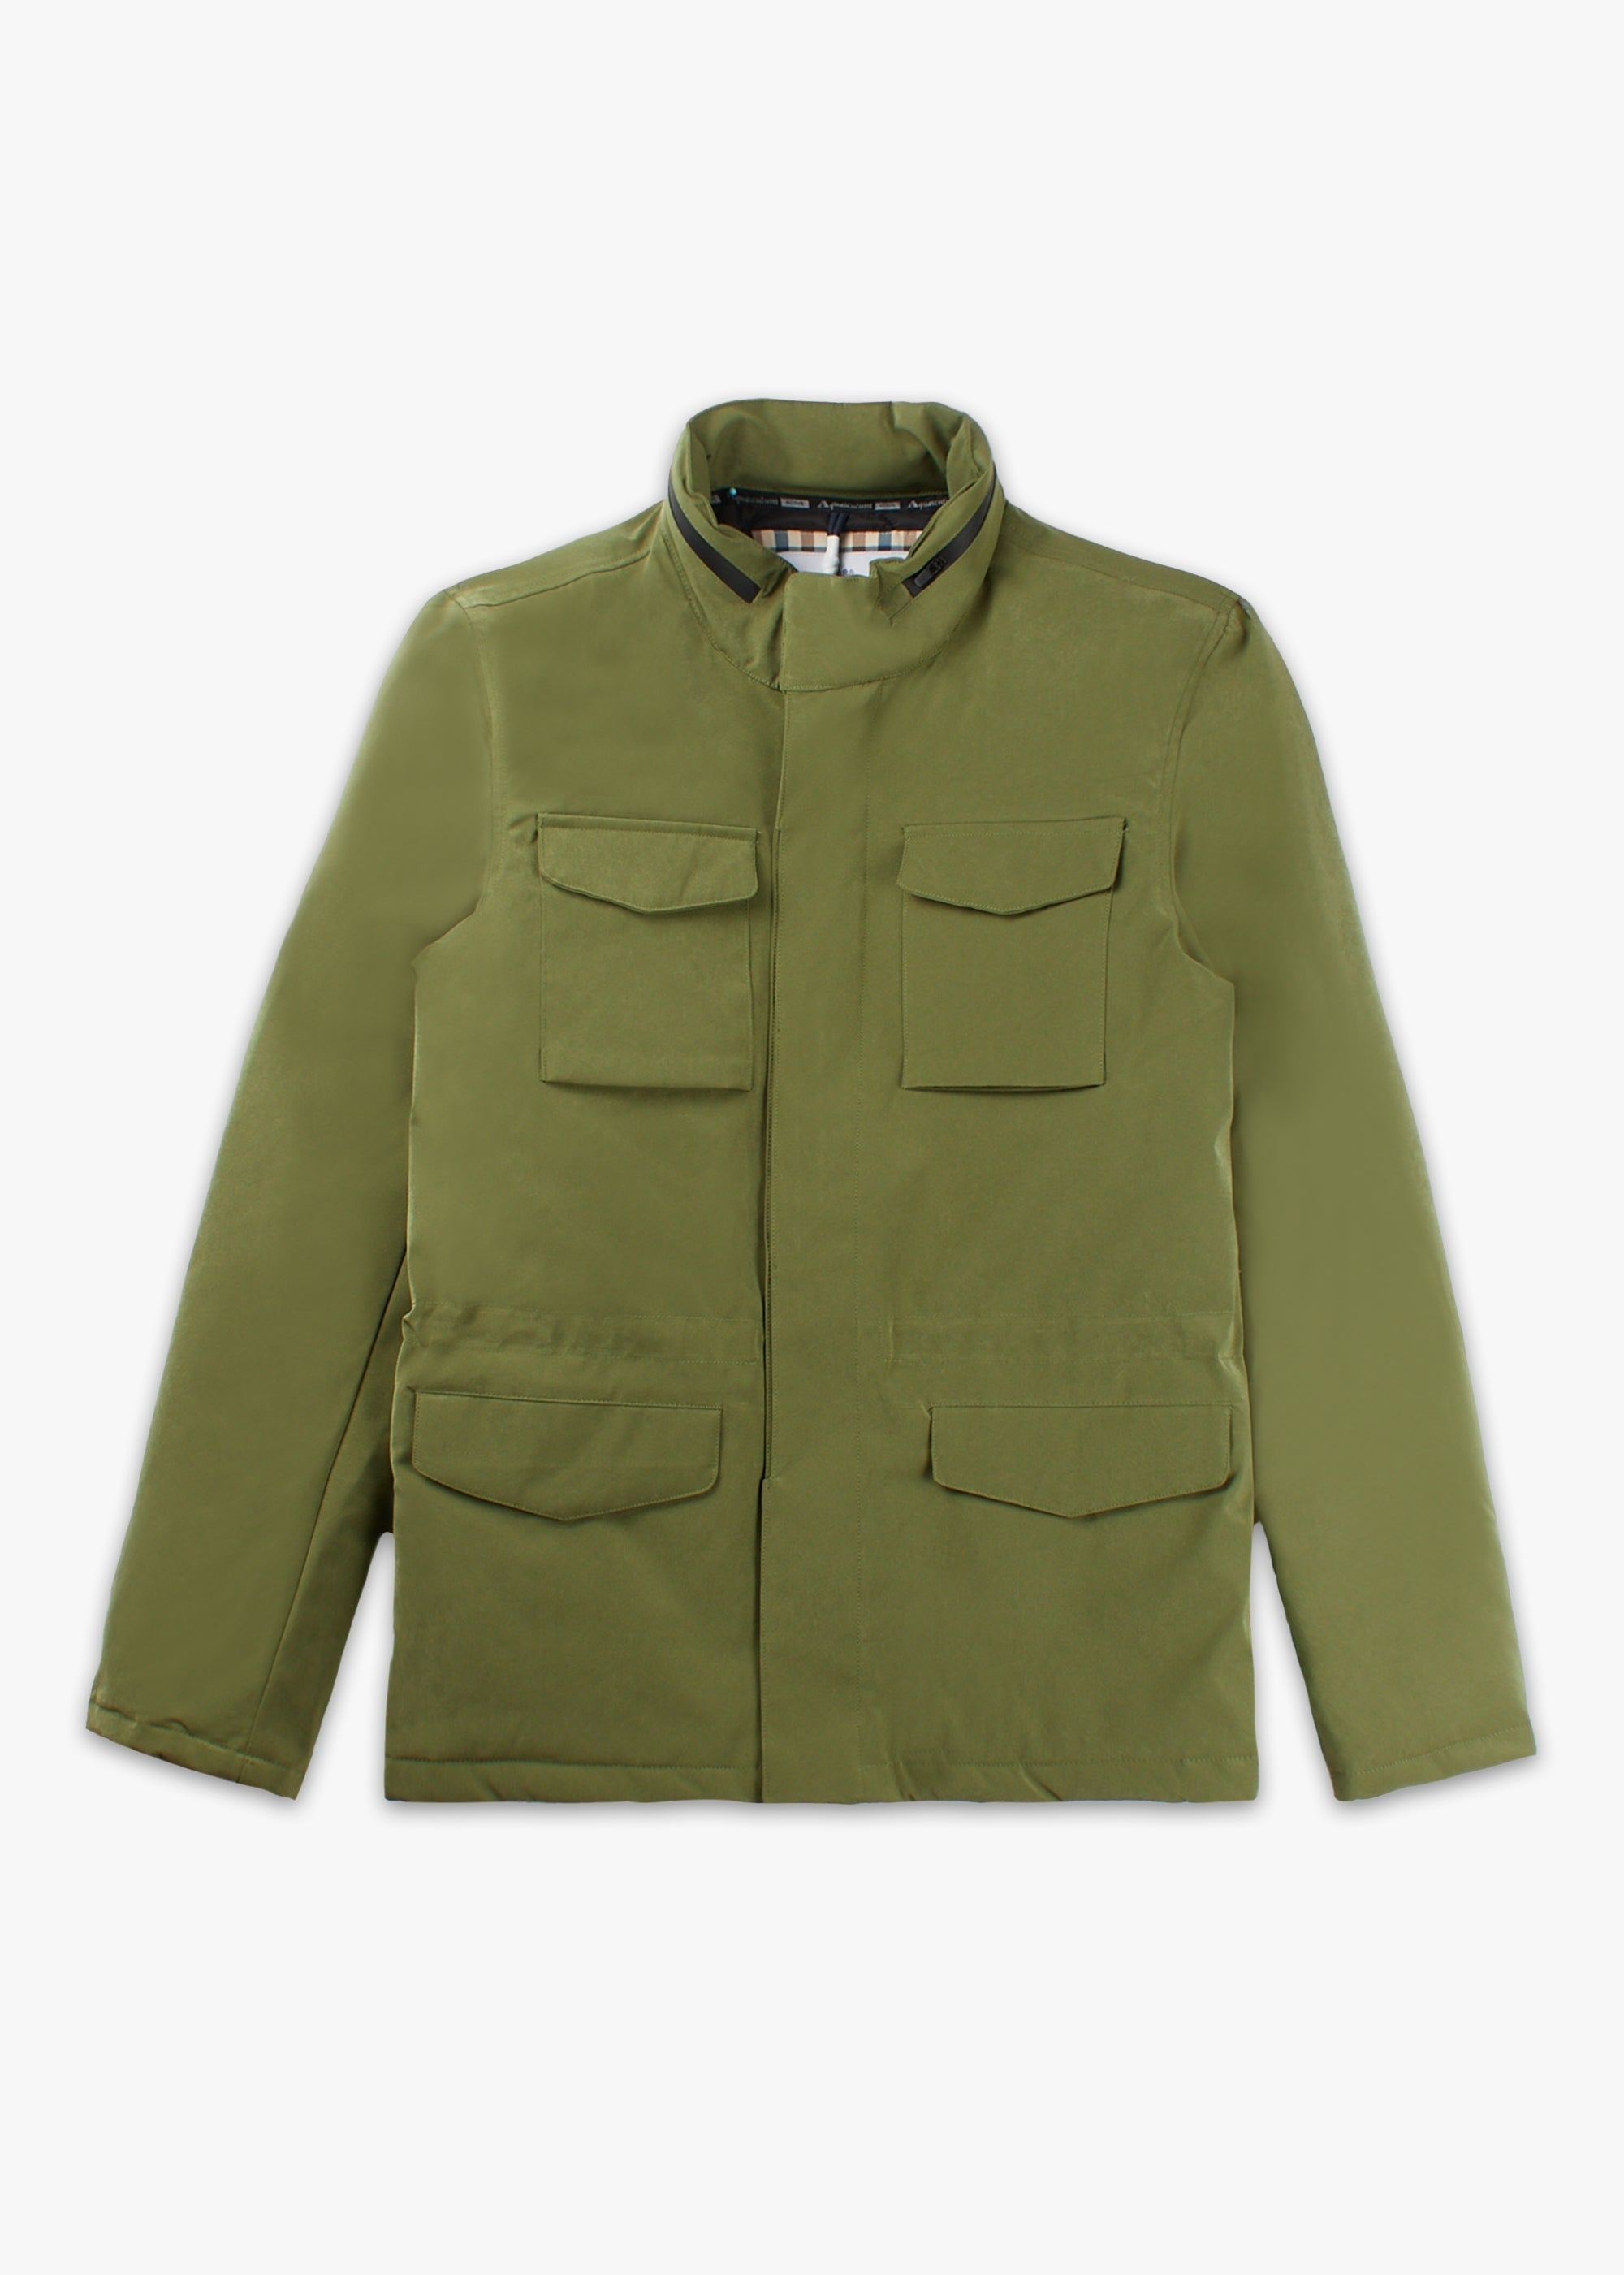 aquascutum-mens-active-field-jacket-in-army-green-1